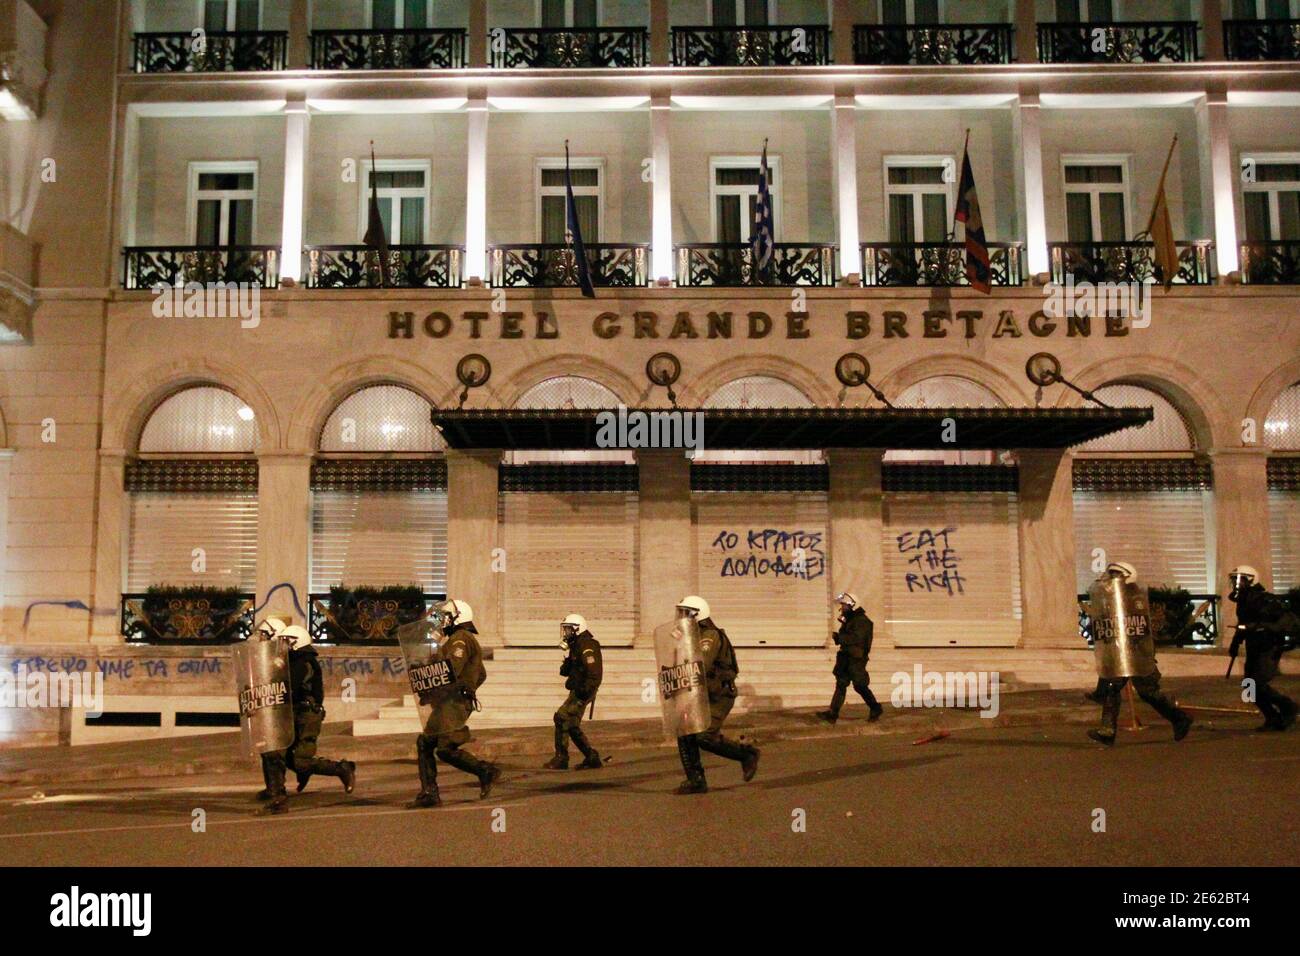 Policemen run in front of the entrance of Grande Bretagne hotel during riots at central Syntagma square in Athens April 4, 2012. Greek police fired teargas to disperse hundreds of protesters taking part in a rally commemorating the death of a Greek pensioner who shot and killed himself in Athens' parliament square on Wednesday after crying out to bystanders that crippling debts had pushed him to take his life. Suicides have risen in Greece as a deepening economic crisis leaves one in five jobless and countless more struggling to survive on sharply reduced salaries and pensions.    REUTERS/John Stock Photo